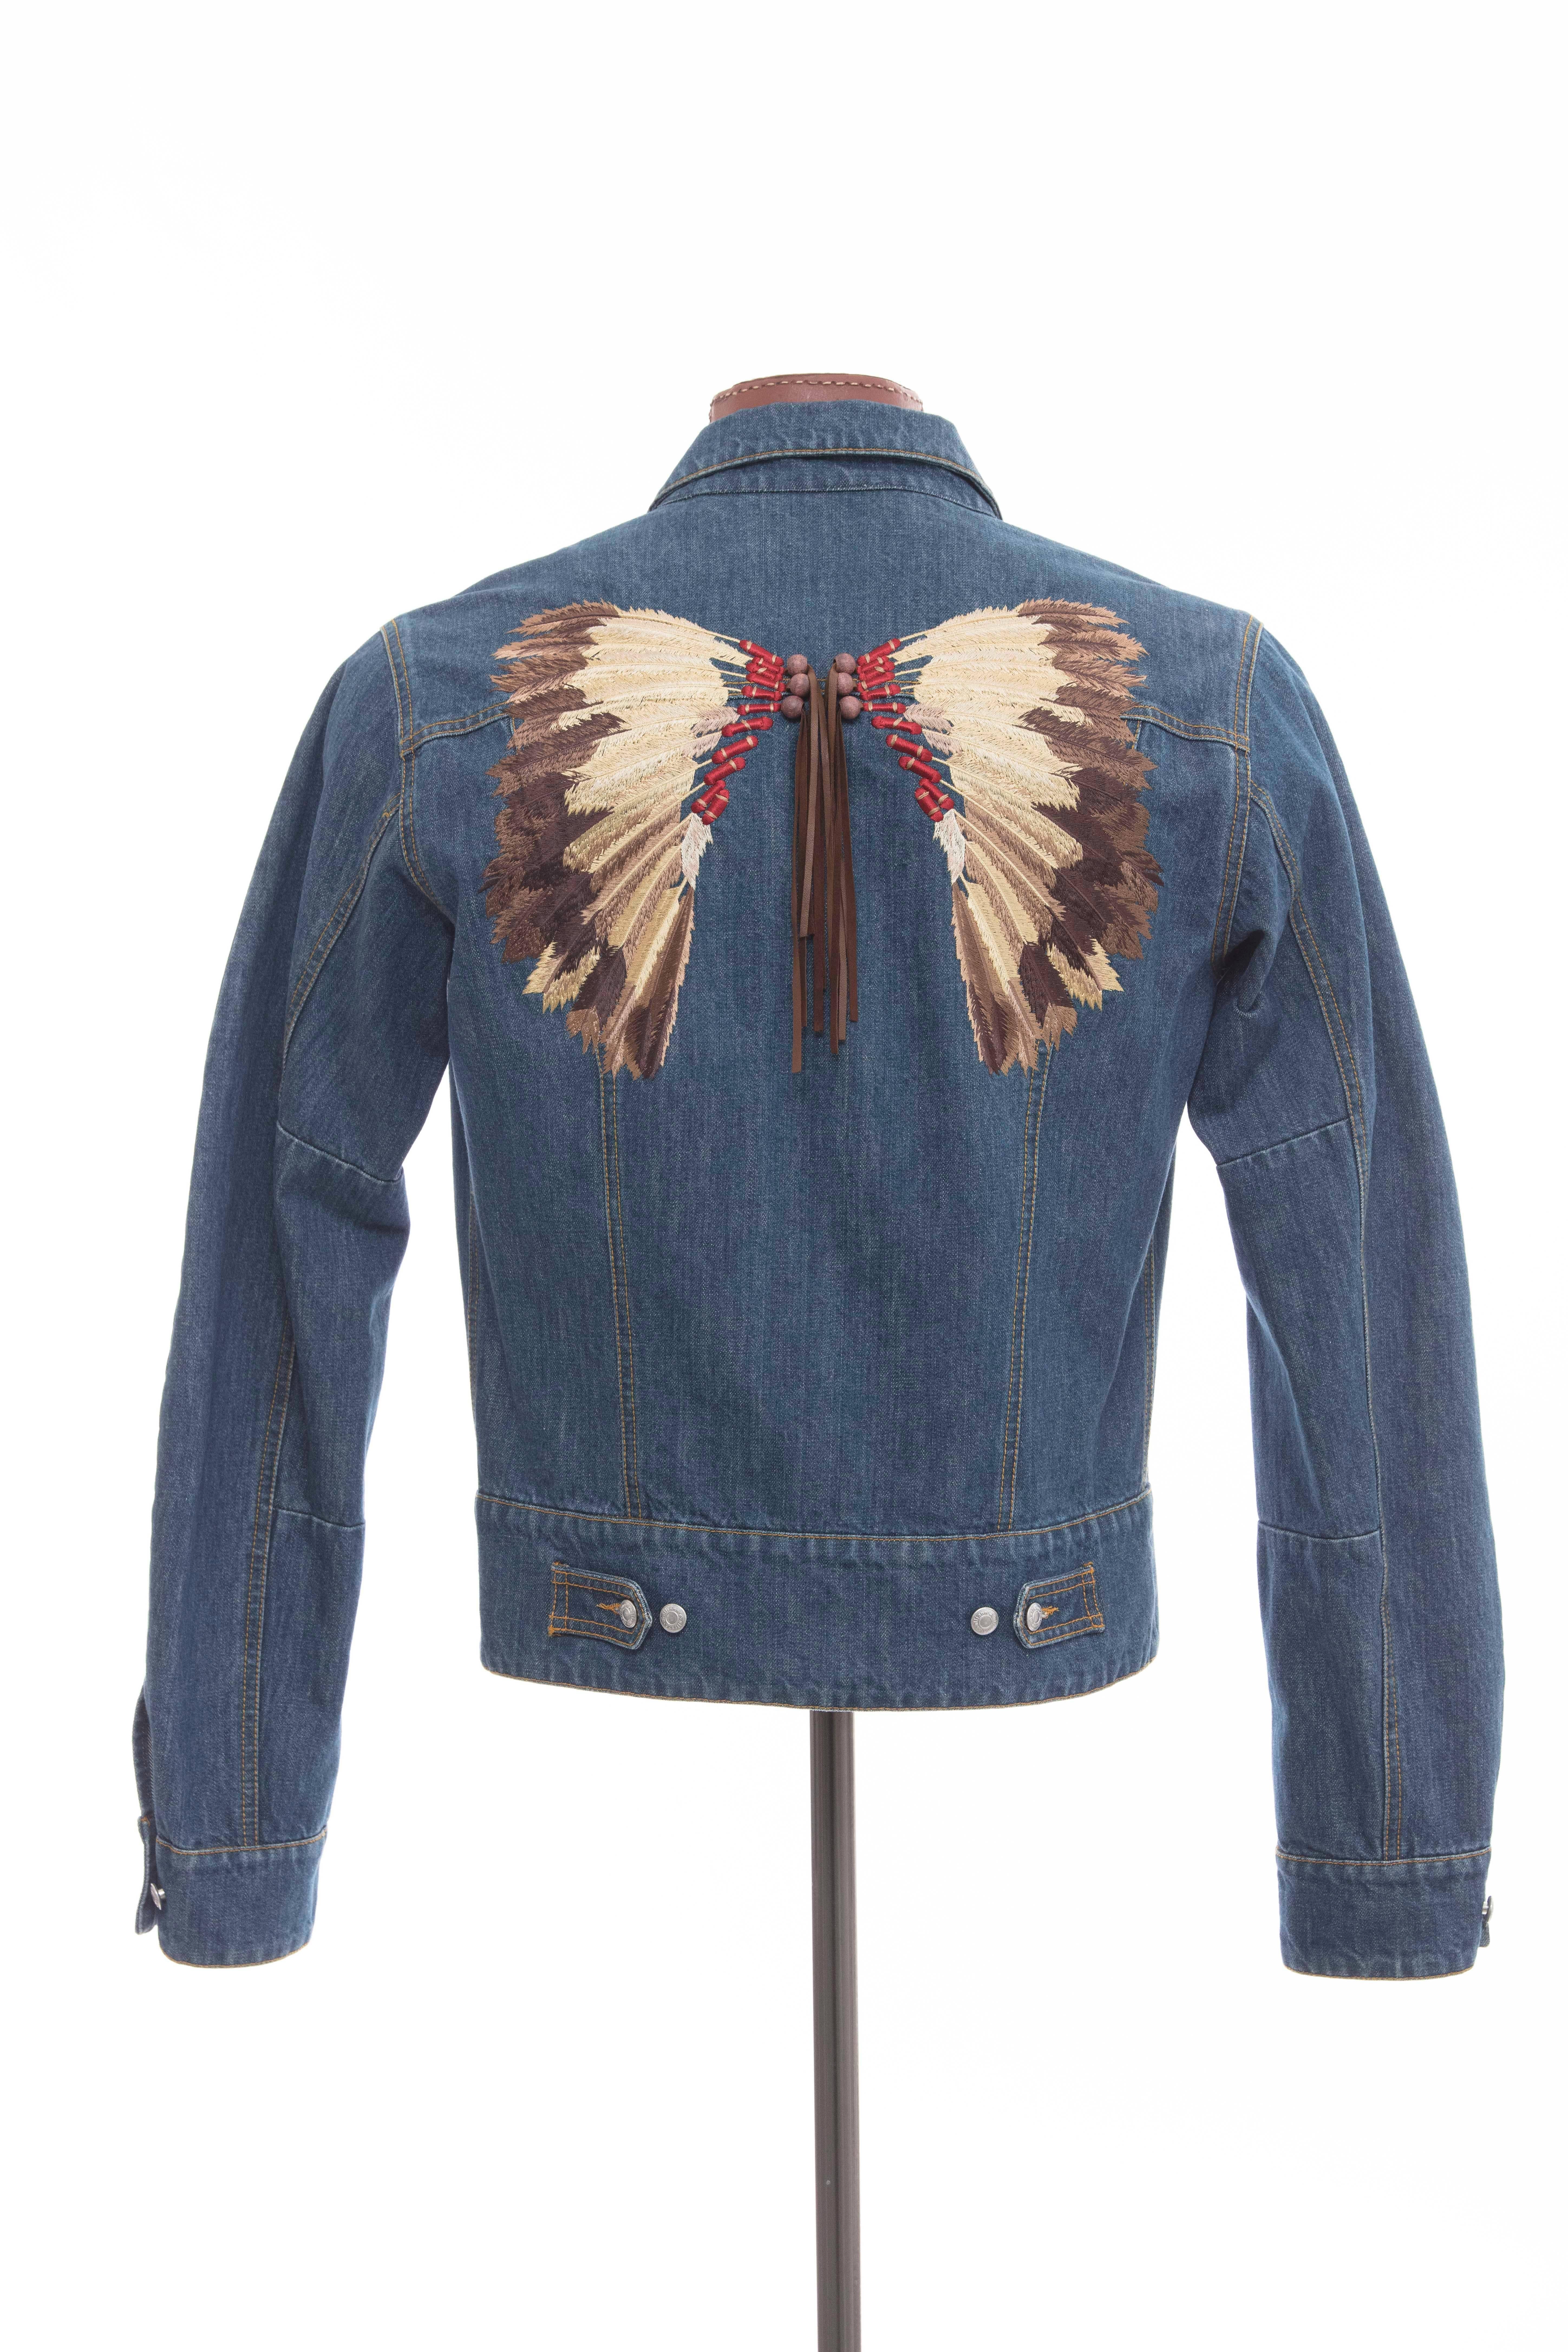 John Galliano men's embroidered denim jacket, button front and two front pockets, embroidered back with wood beads and leather fringe.

EU. size 50